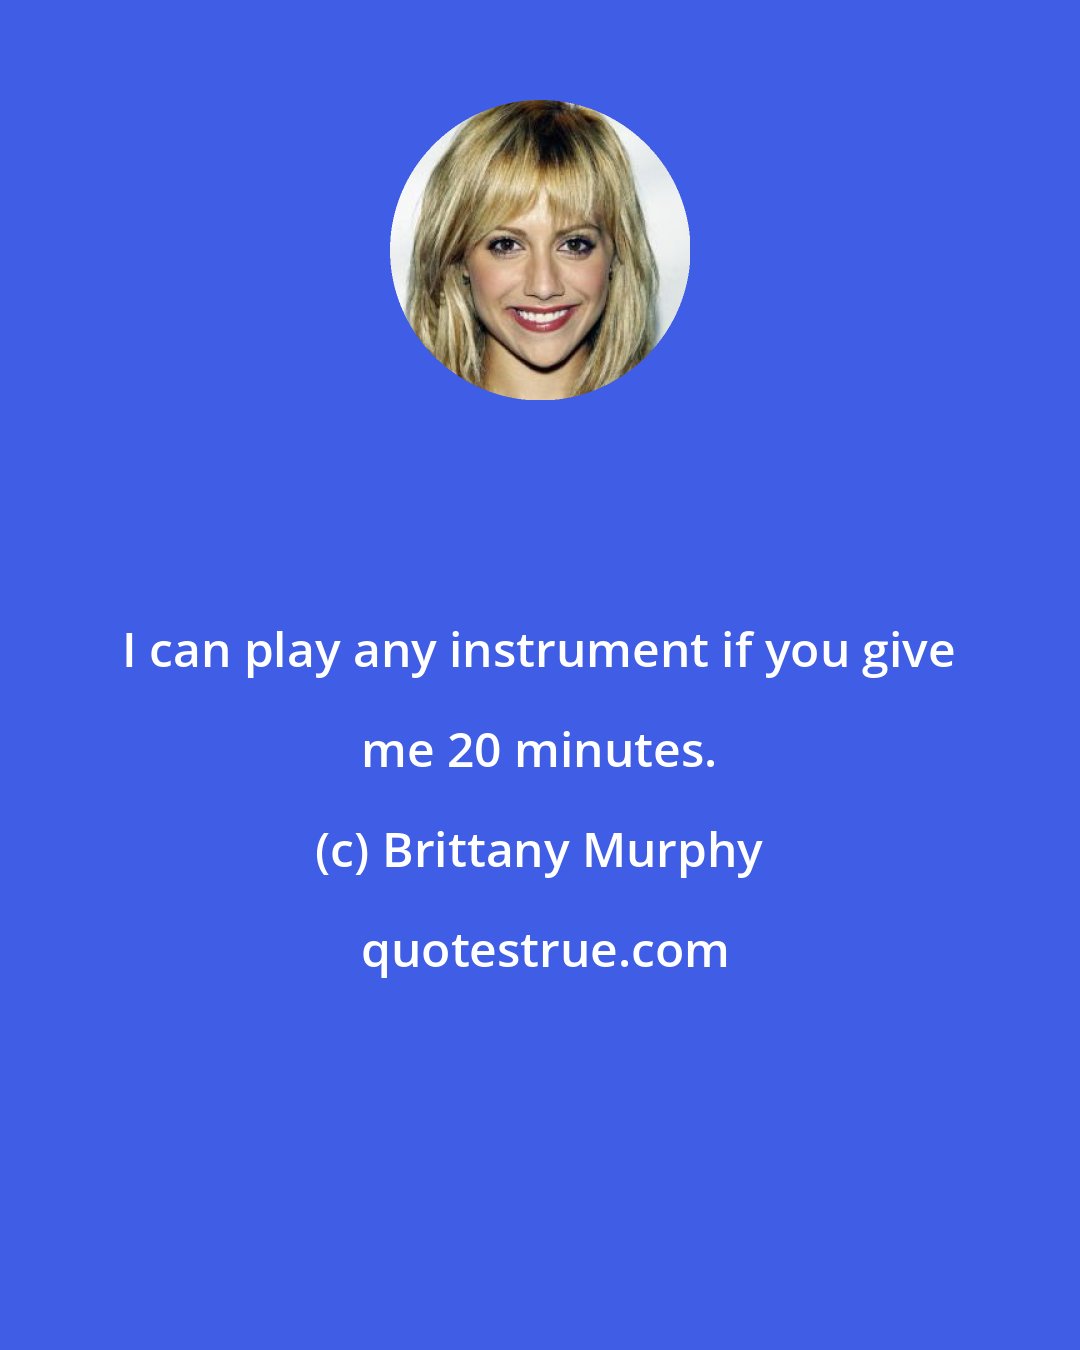 Brittany Murphy: I can play any instrument if you give me 20 minutes.